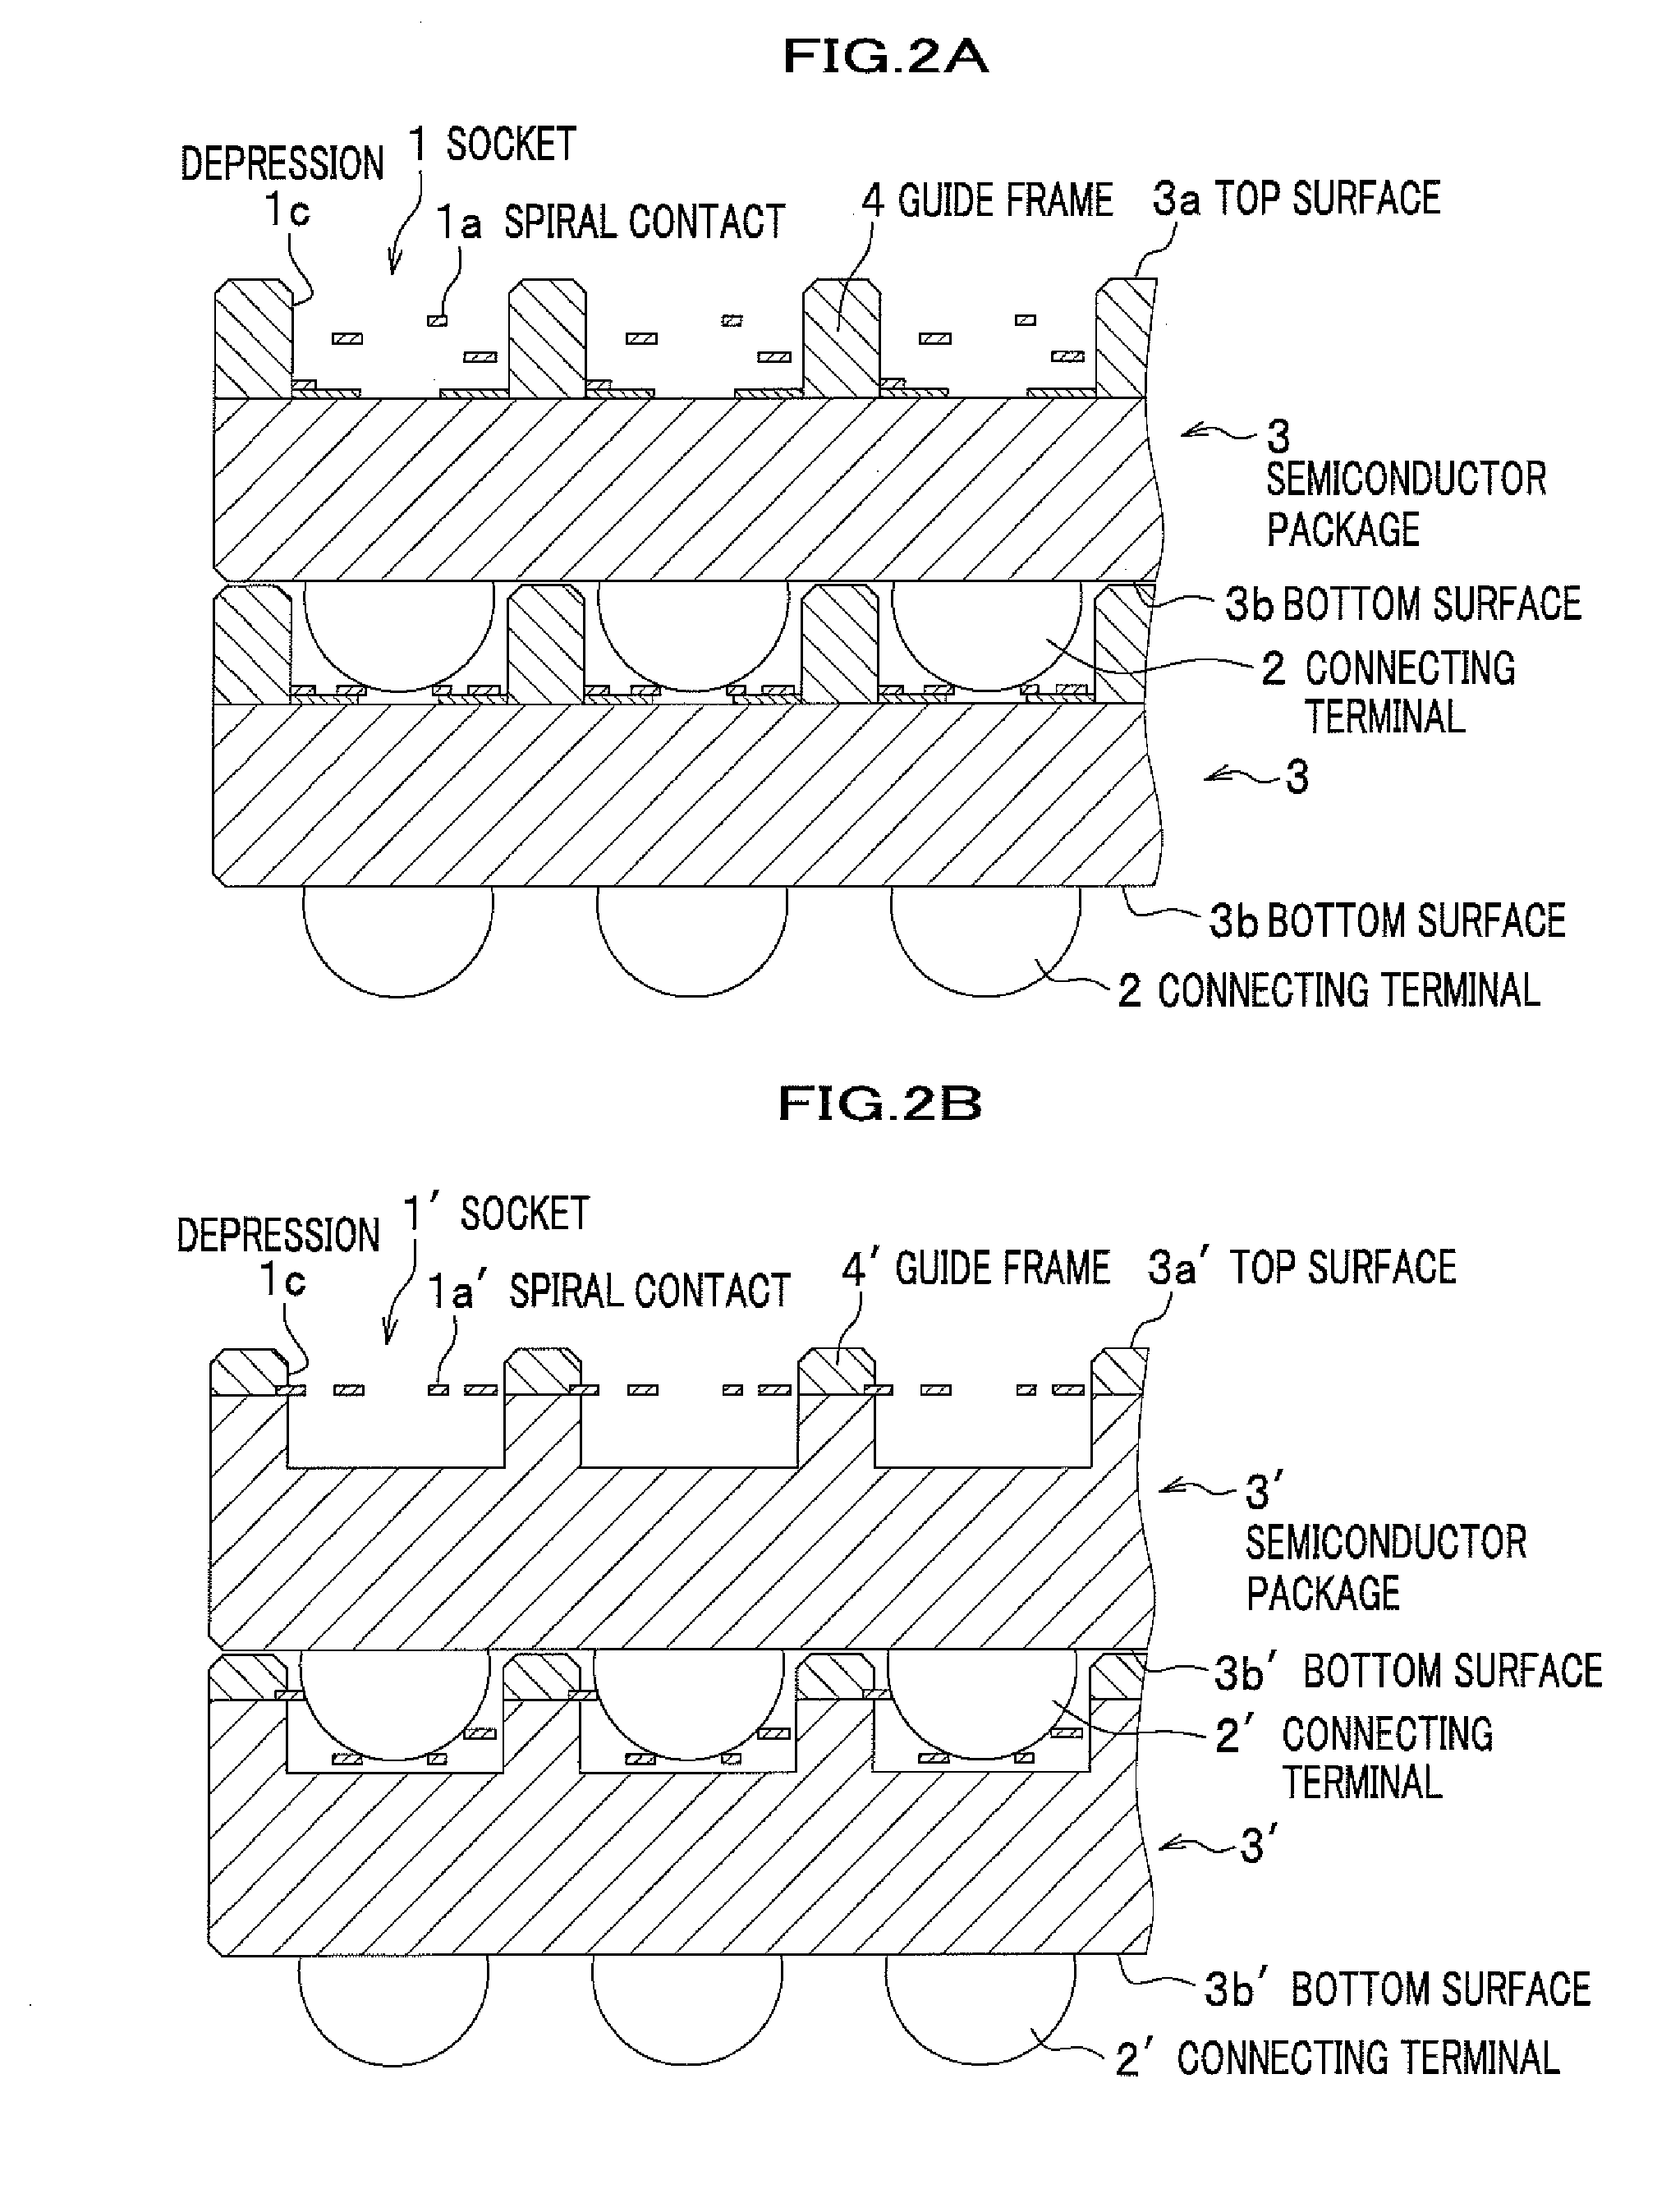 Semiconductor Package Having Socket Function, Semiconductor Module, Electronic Circuit Module and Circuit Board with Socket